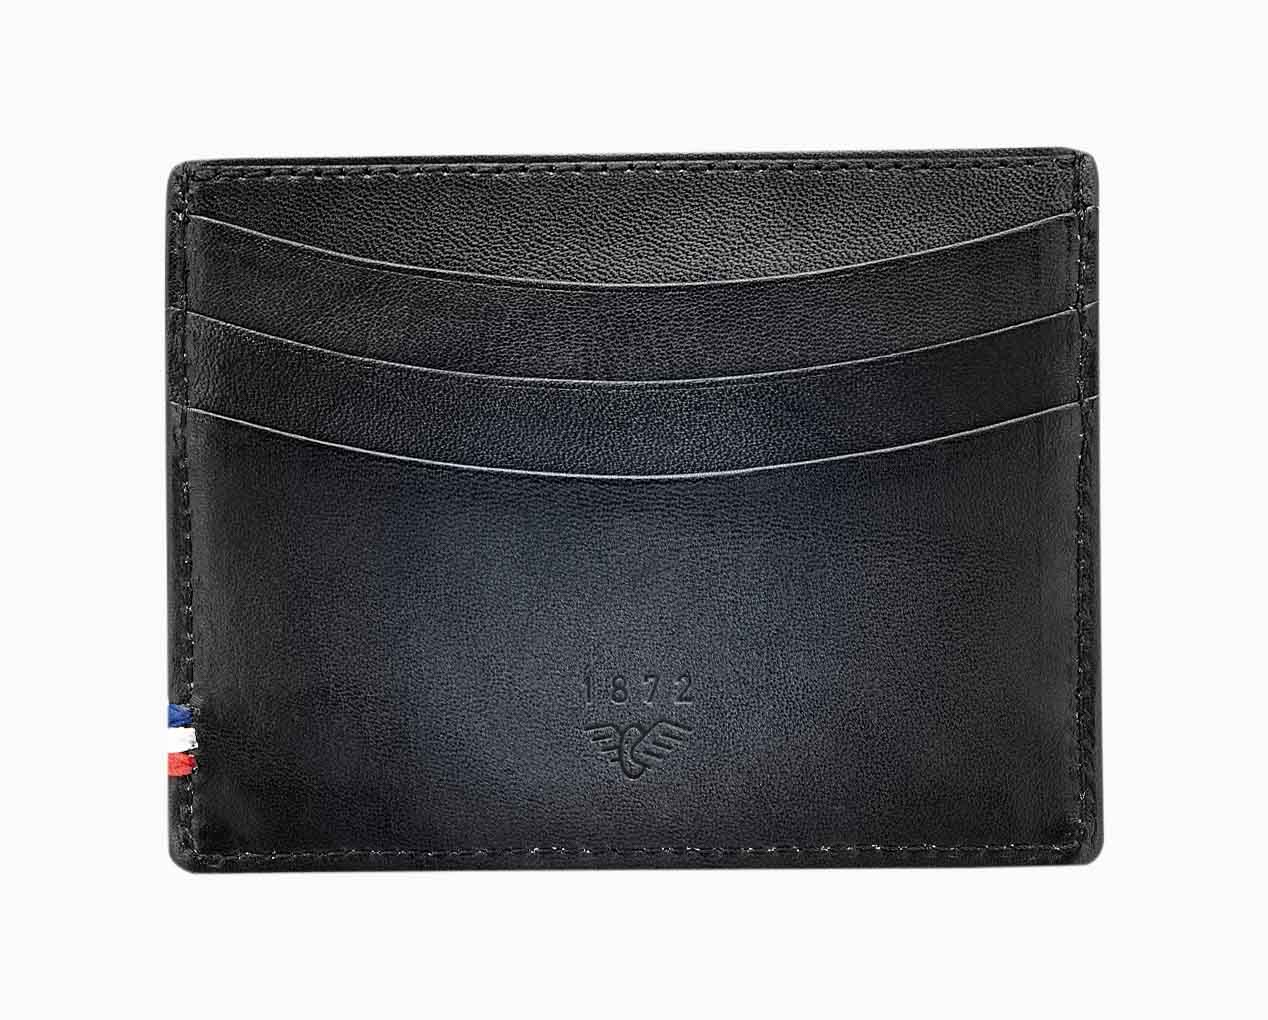 Habanos Specialist Vietnam ACCESSORIES [style_3597390237064] Ví đựng thẻ màu đen hiệu S.T. Dupont (LEATHER CREDIT CARD HOLDER  style no 190242).